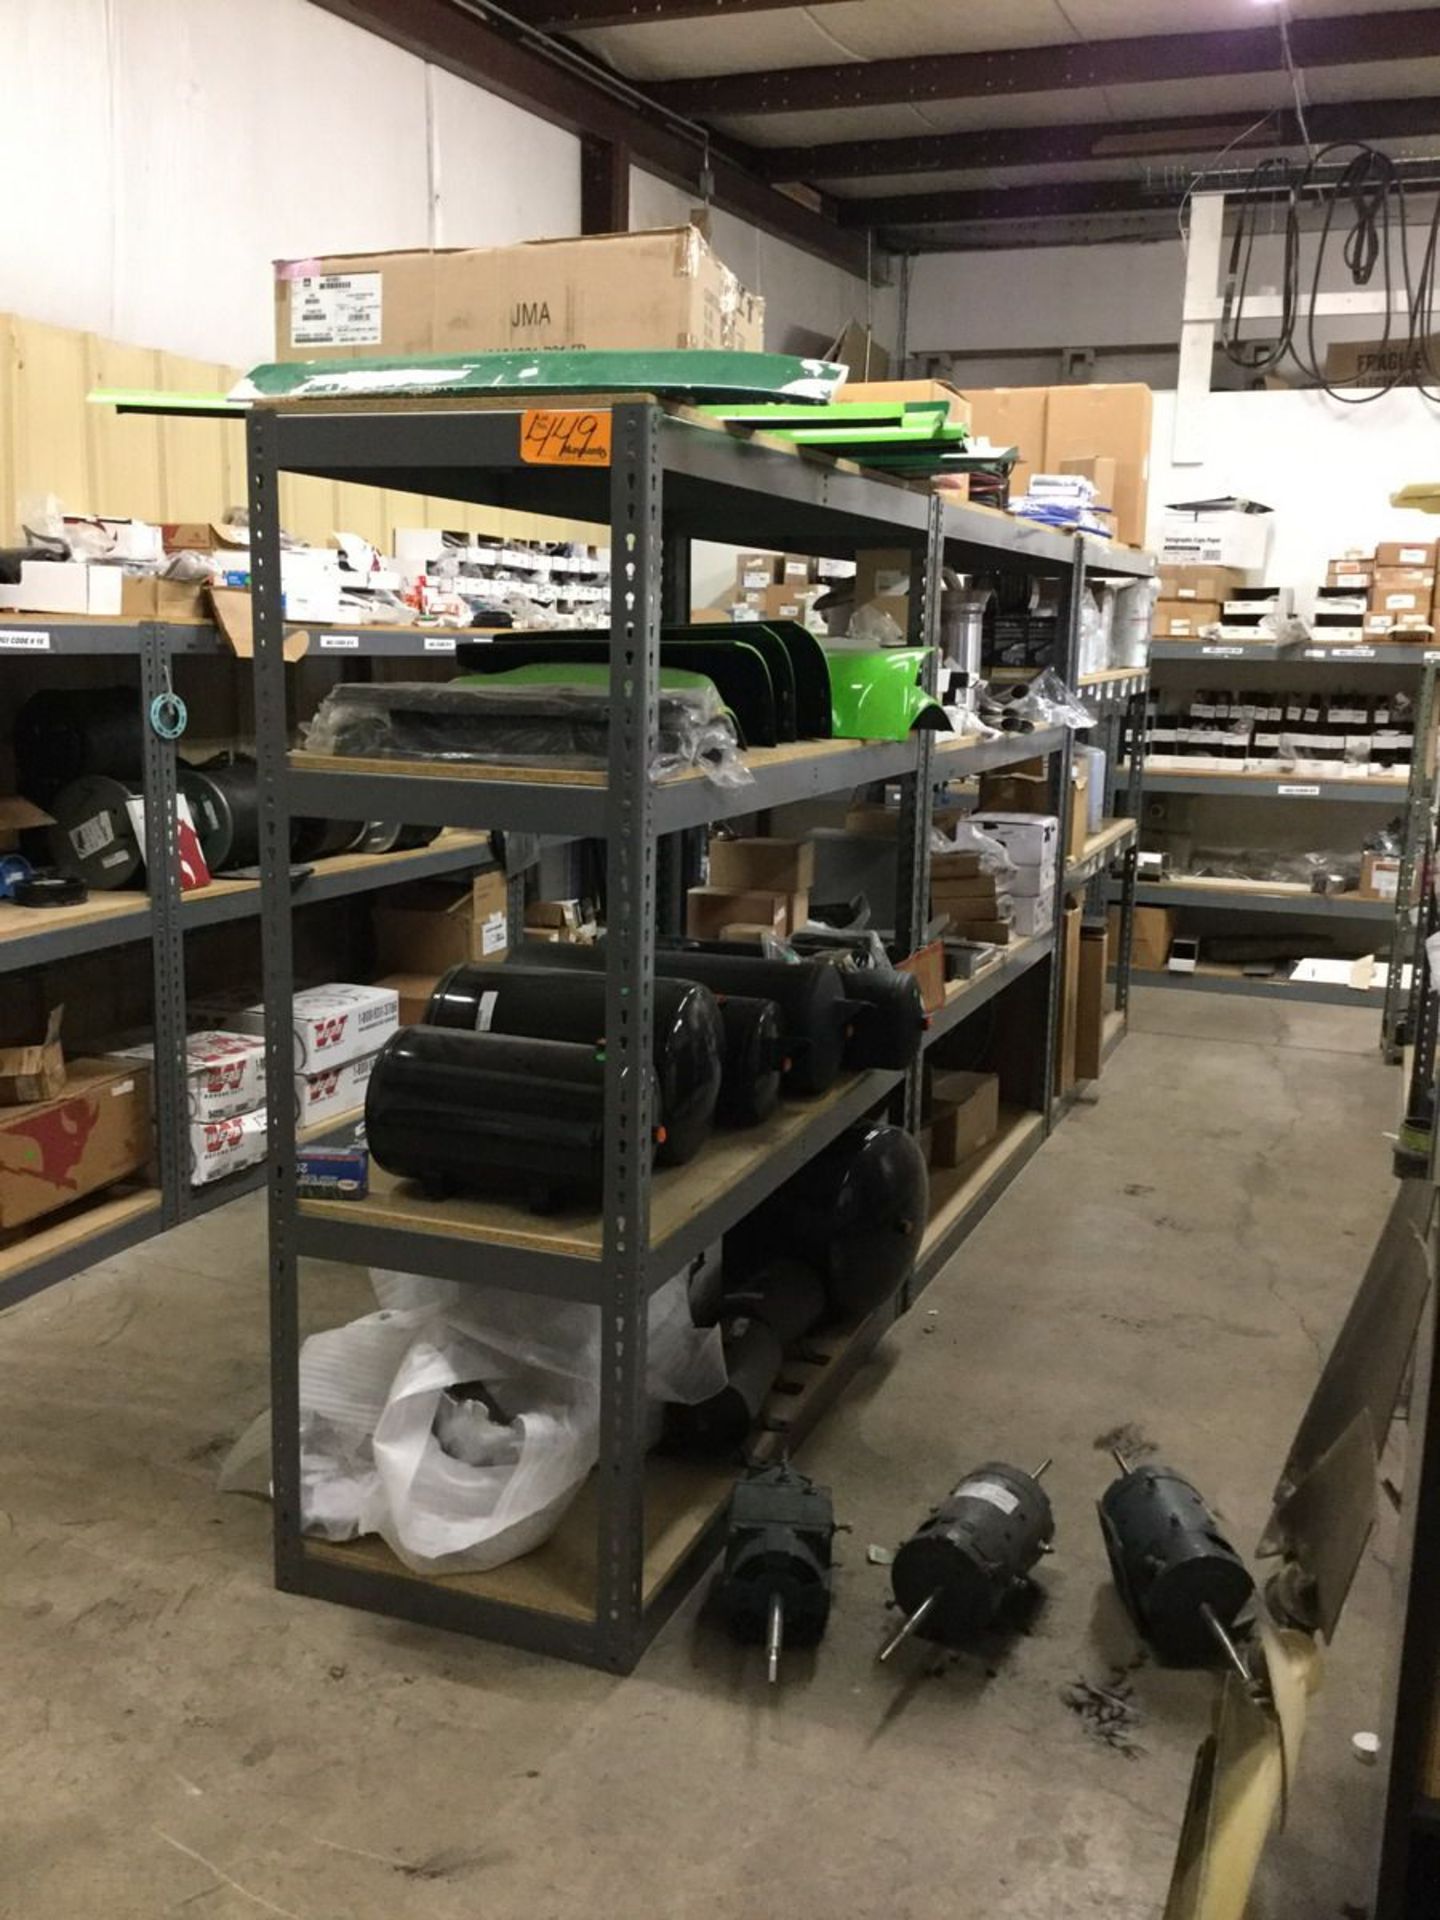 Lot of Spare Parts to Include: Air Ride Air Tanks, Oil Filters, Light Fixtures, Heat Exchangers,